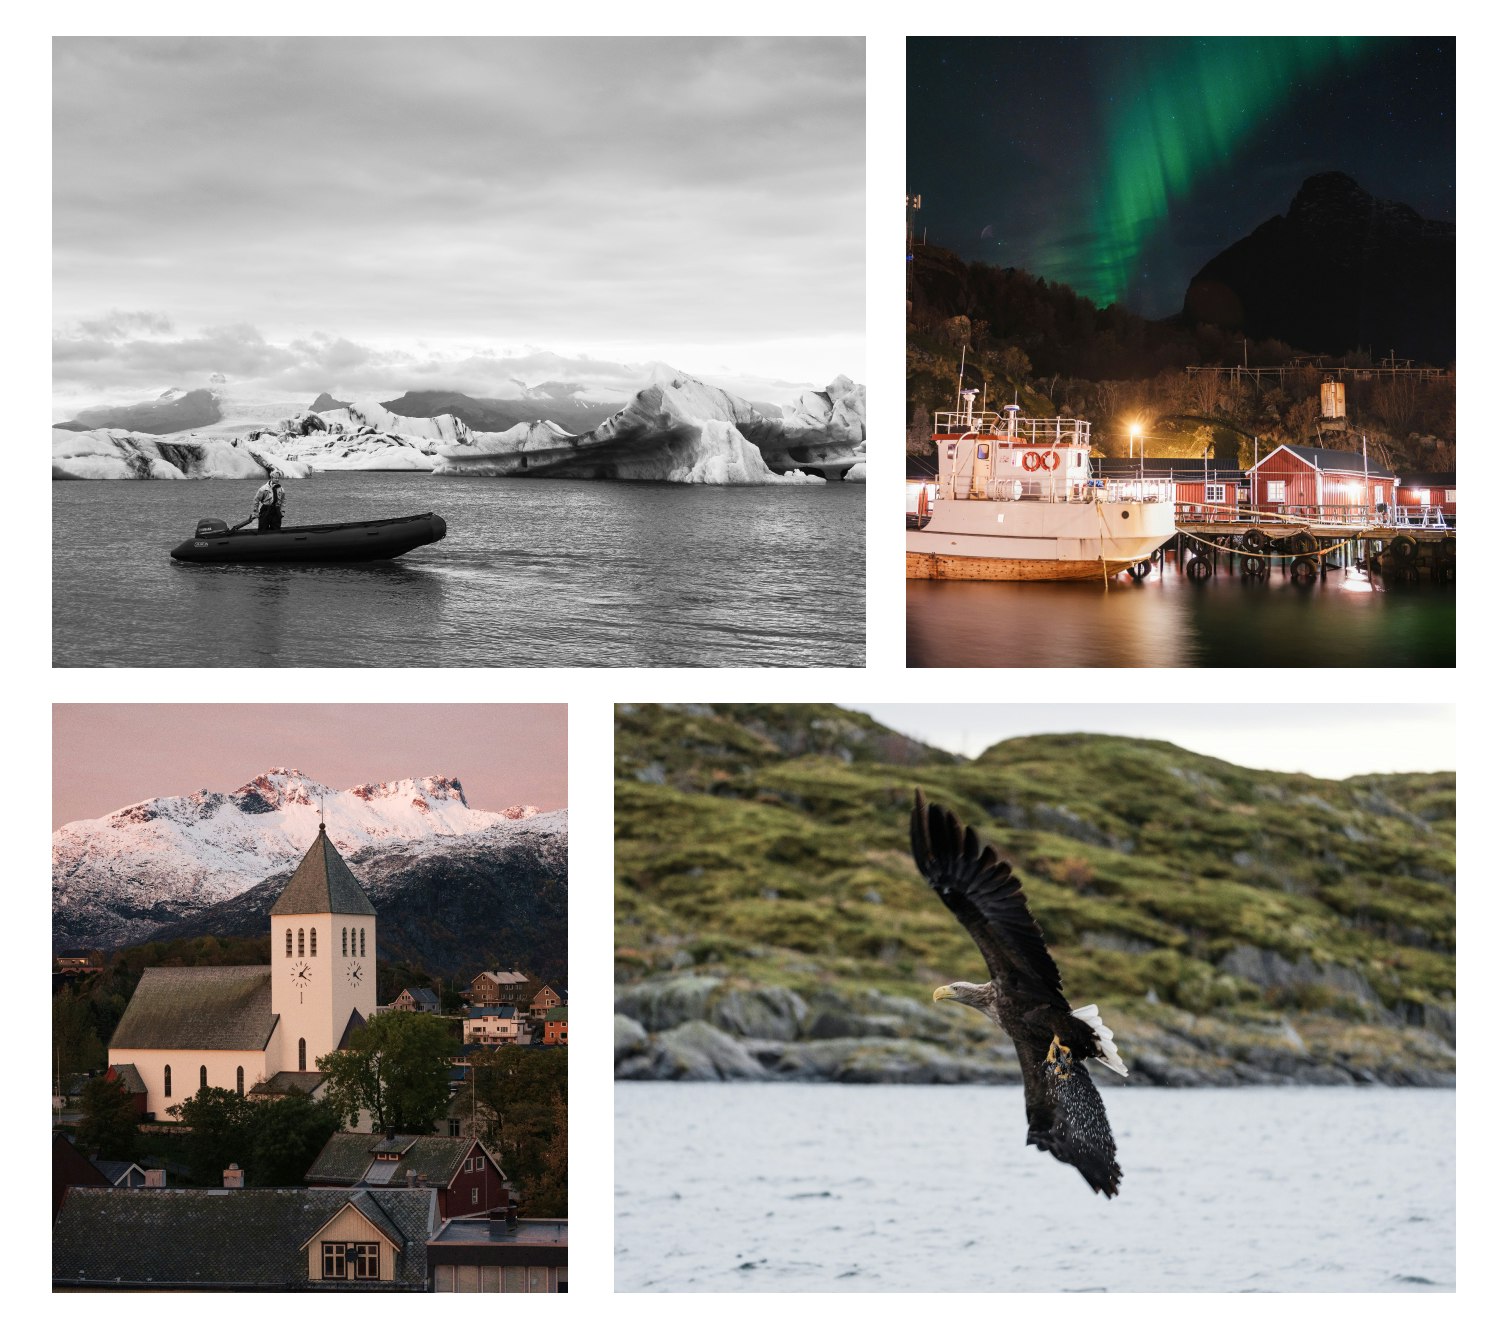 Photos taken from some recent travels up to Iceland and Norway above the Arctic Circle